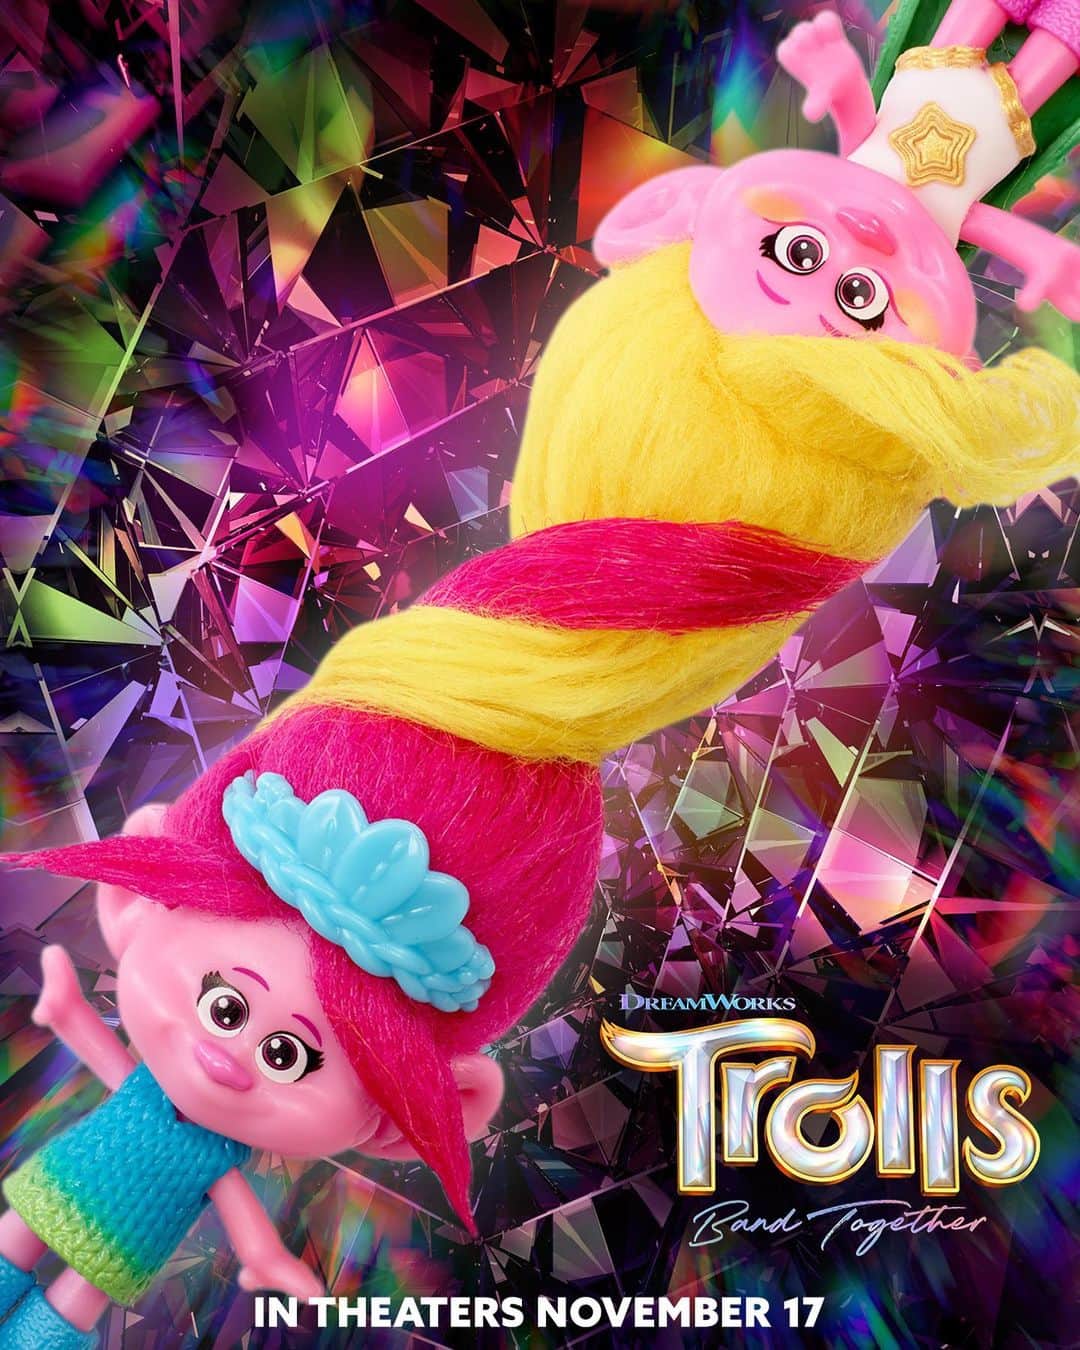 Mattelのインスタグラム：「Get ready for something fantastamazing! Grab your bestie and celebrate sisterhood with @Mattel dolls inspired by #TrollsBandTogether. See the film in theaters November 17! #DreamWorks」